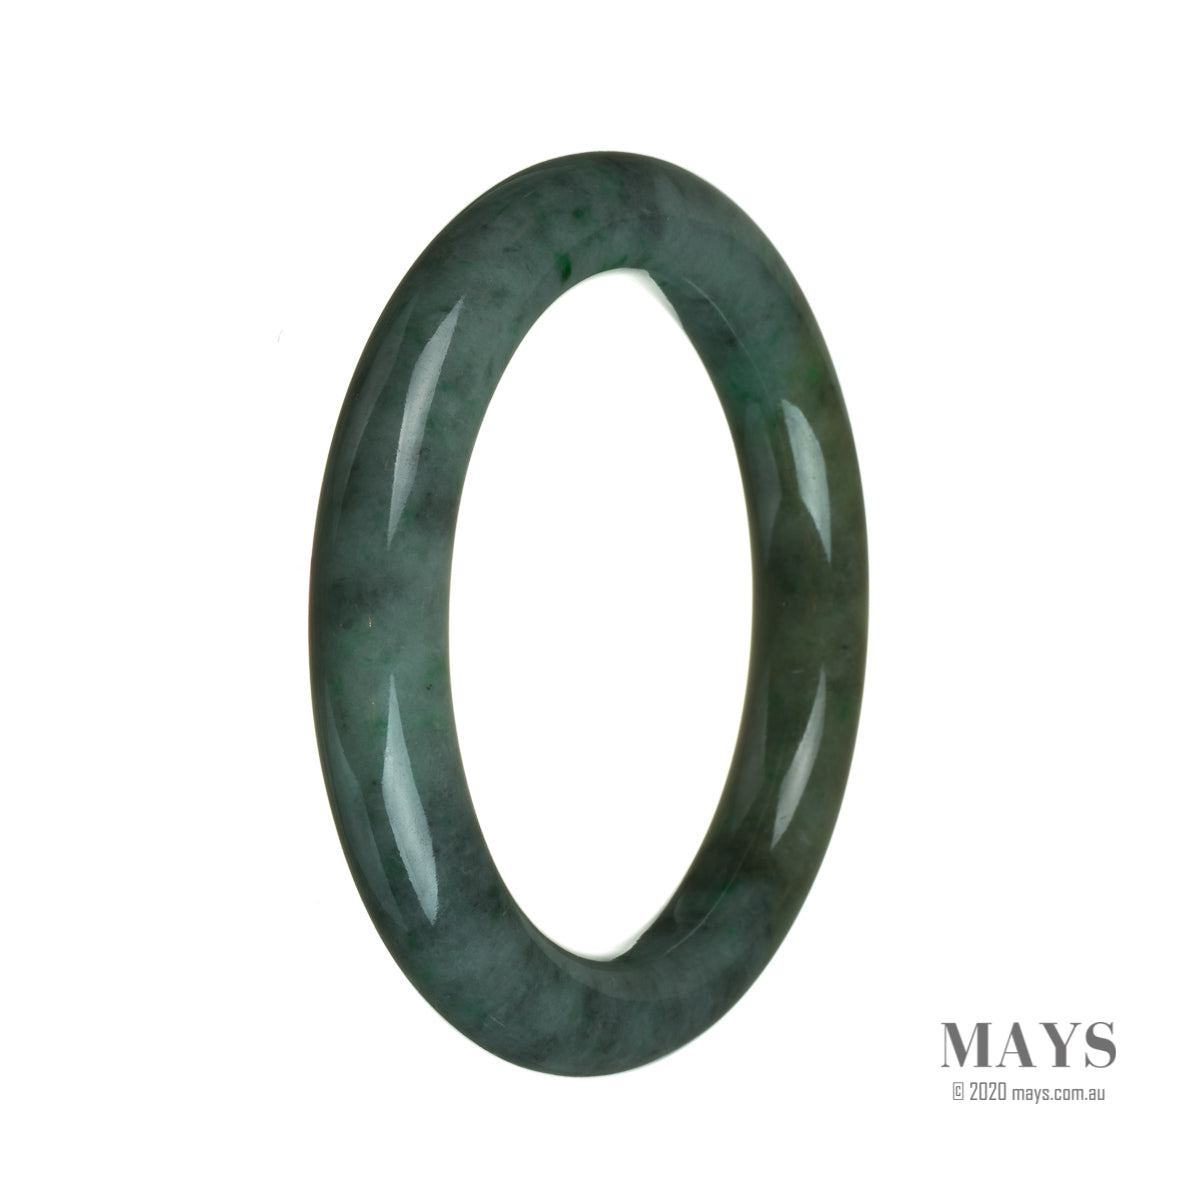 A round, grade A deep green jade bangle bracelet with an authentic and unique look. Perfect for adding a touch of elegance and style to any outfit.